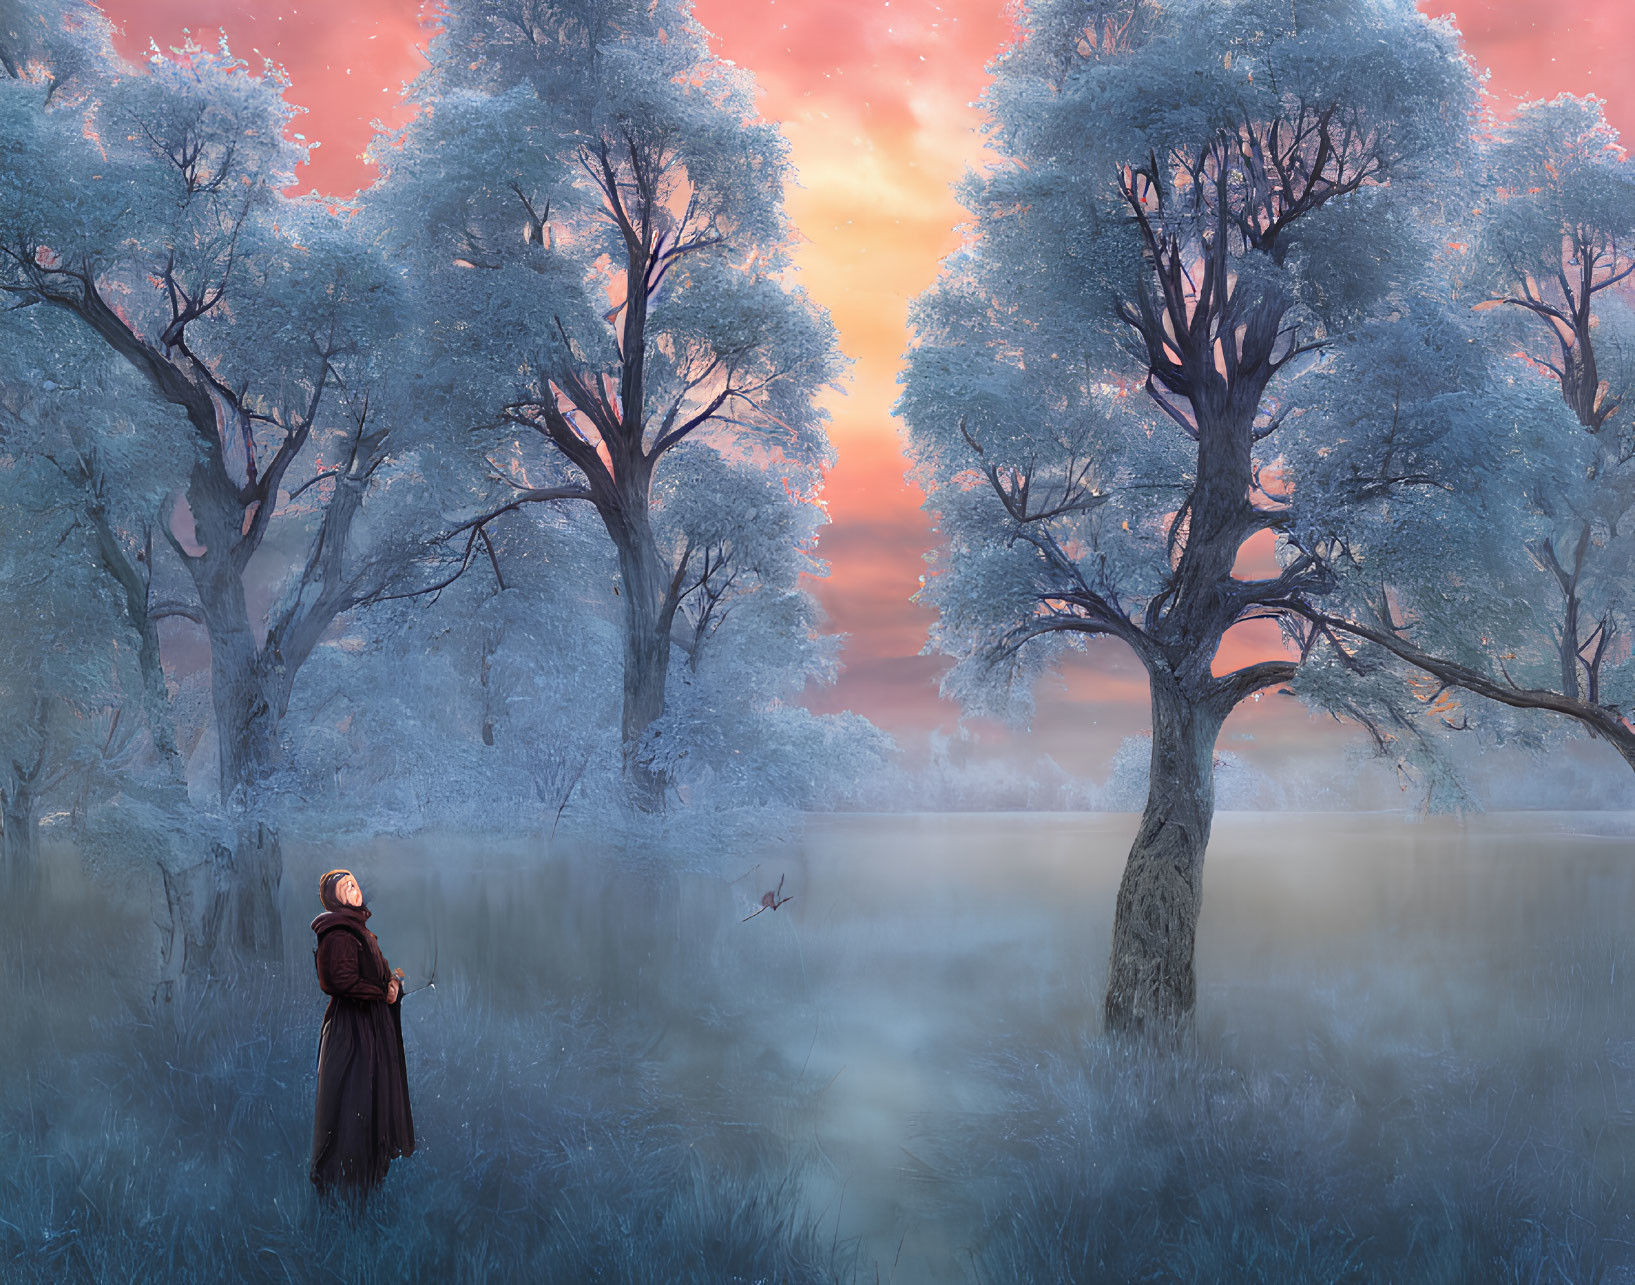 Cloaked figure in misty forest under colorful sky